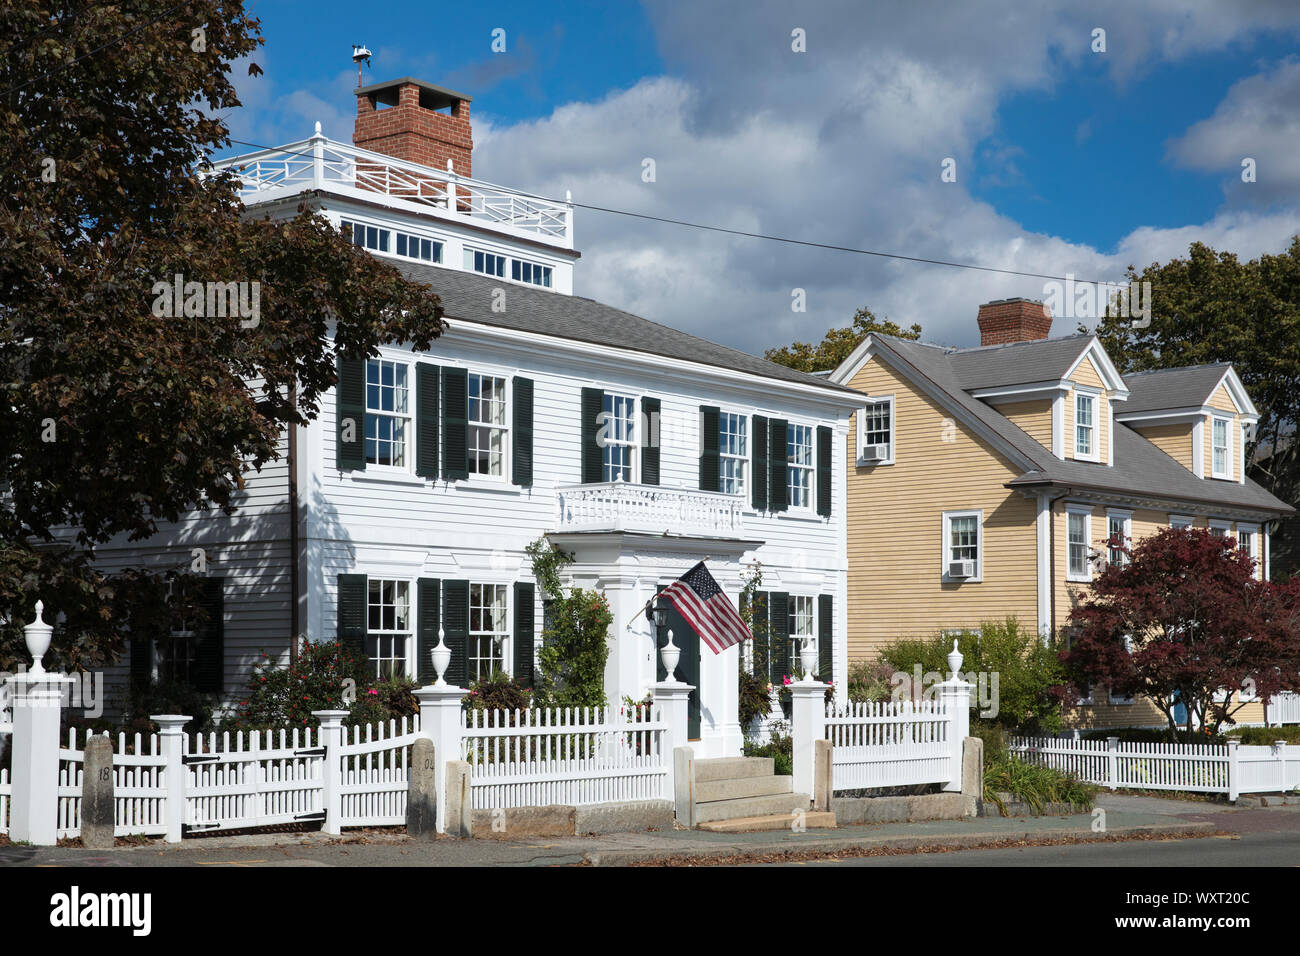 Elegant traditional wooden clapboard house with patriotic Stars and Stripes flag at Manchester-by-the-Sea. Massachusetts, USA Stock Photo